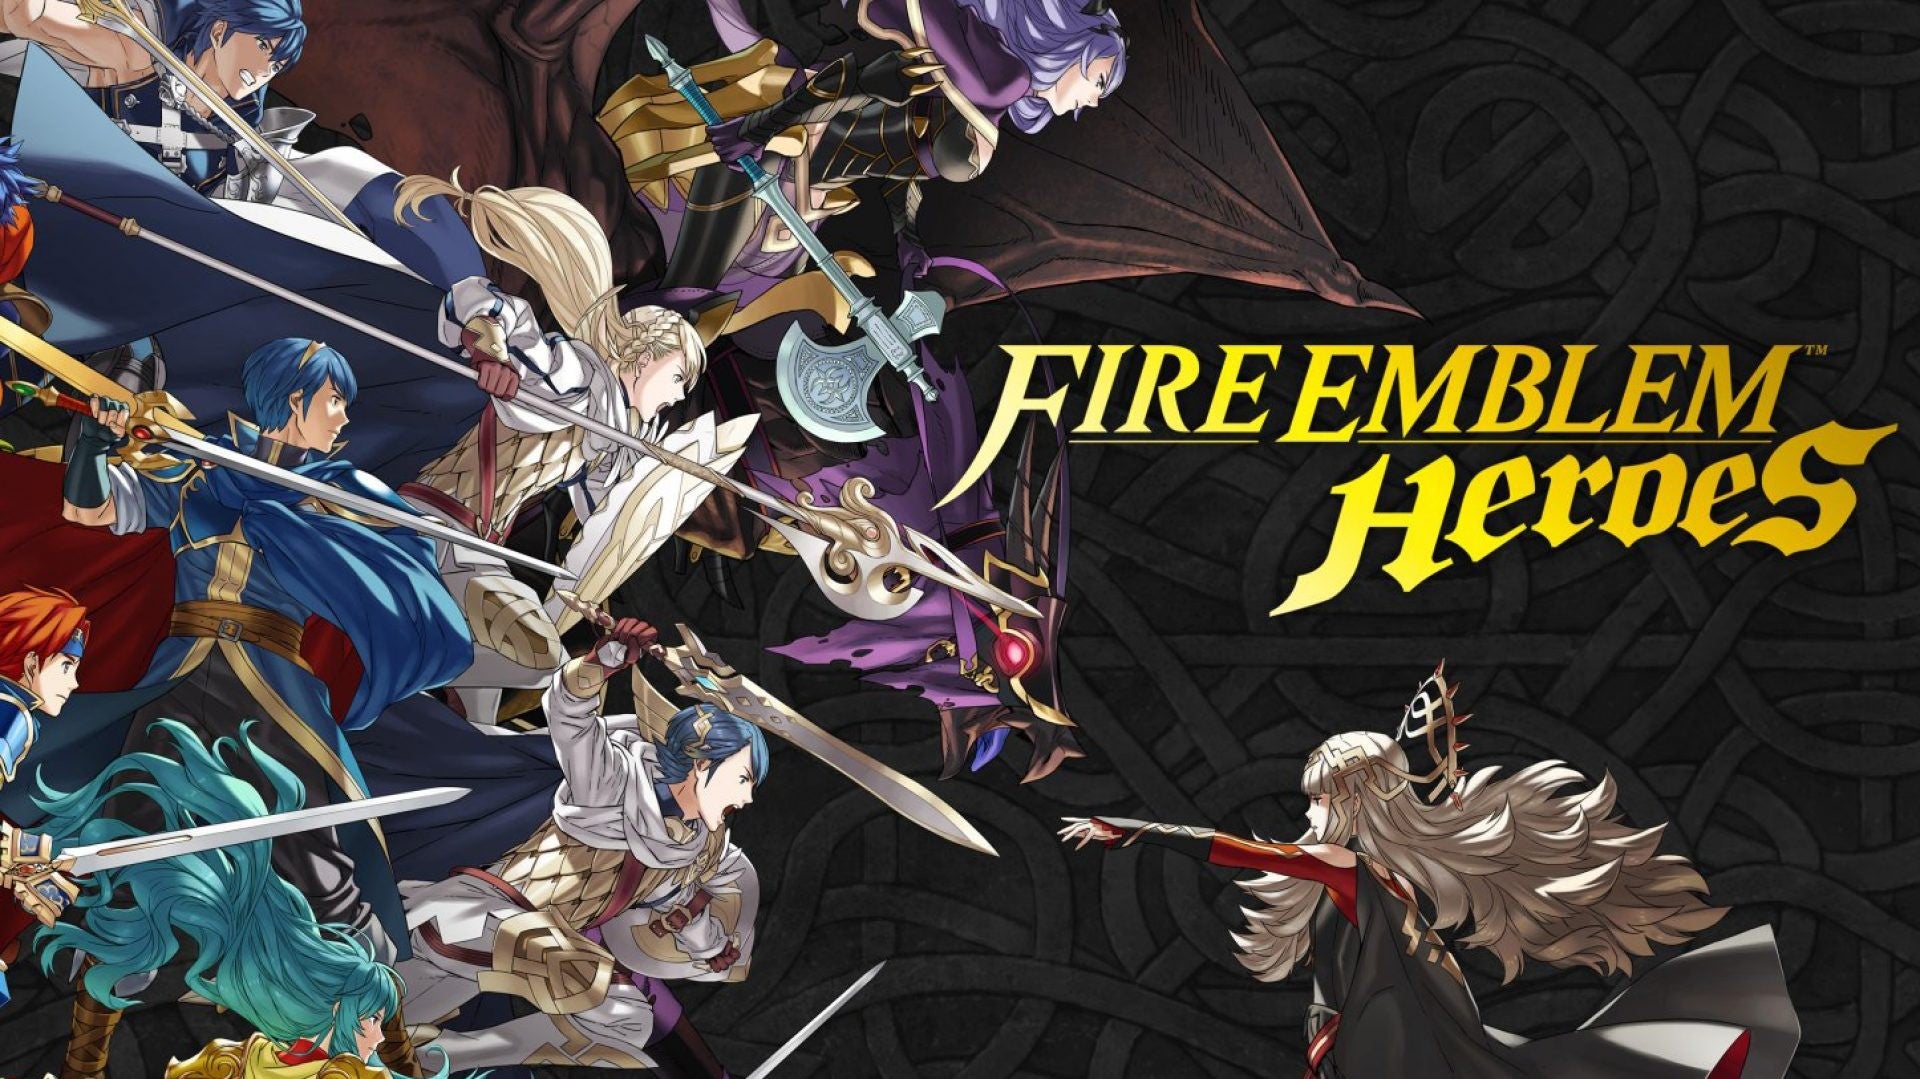 Get tons of free orbs playing Fire Emblem Heroes this week; special event adds new quests and maps